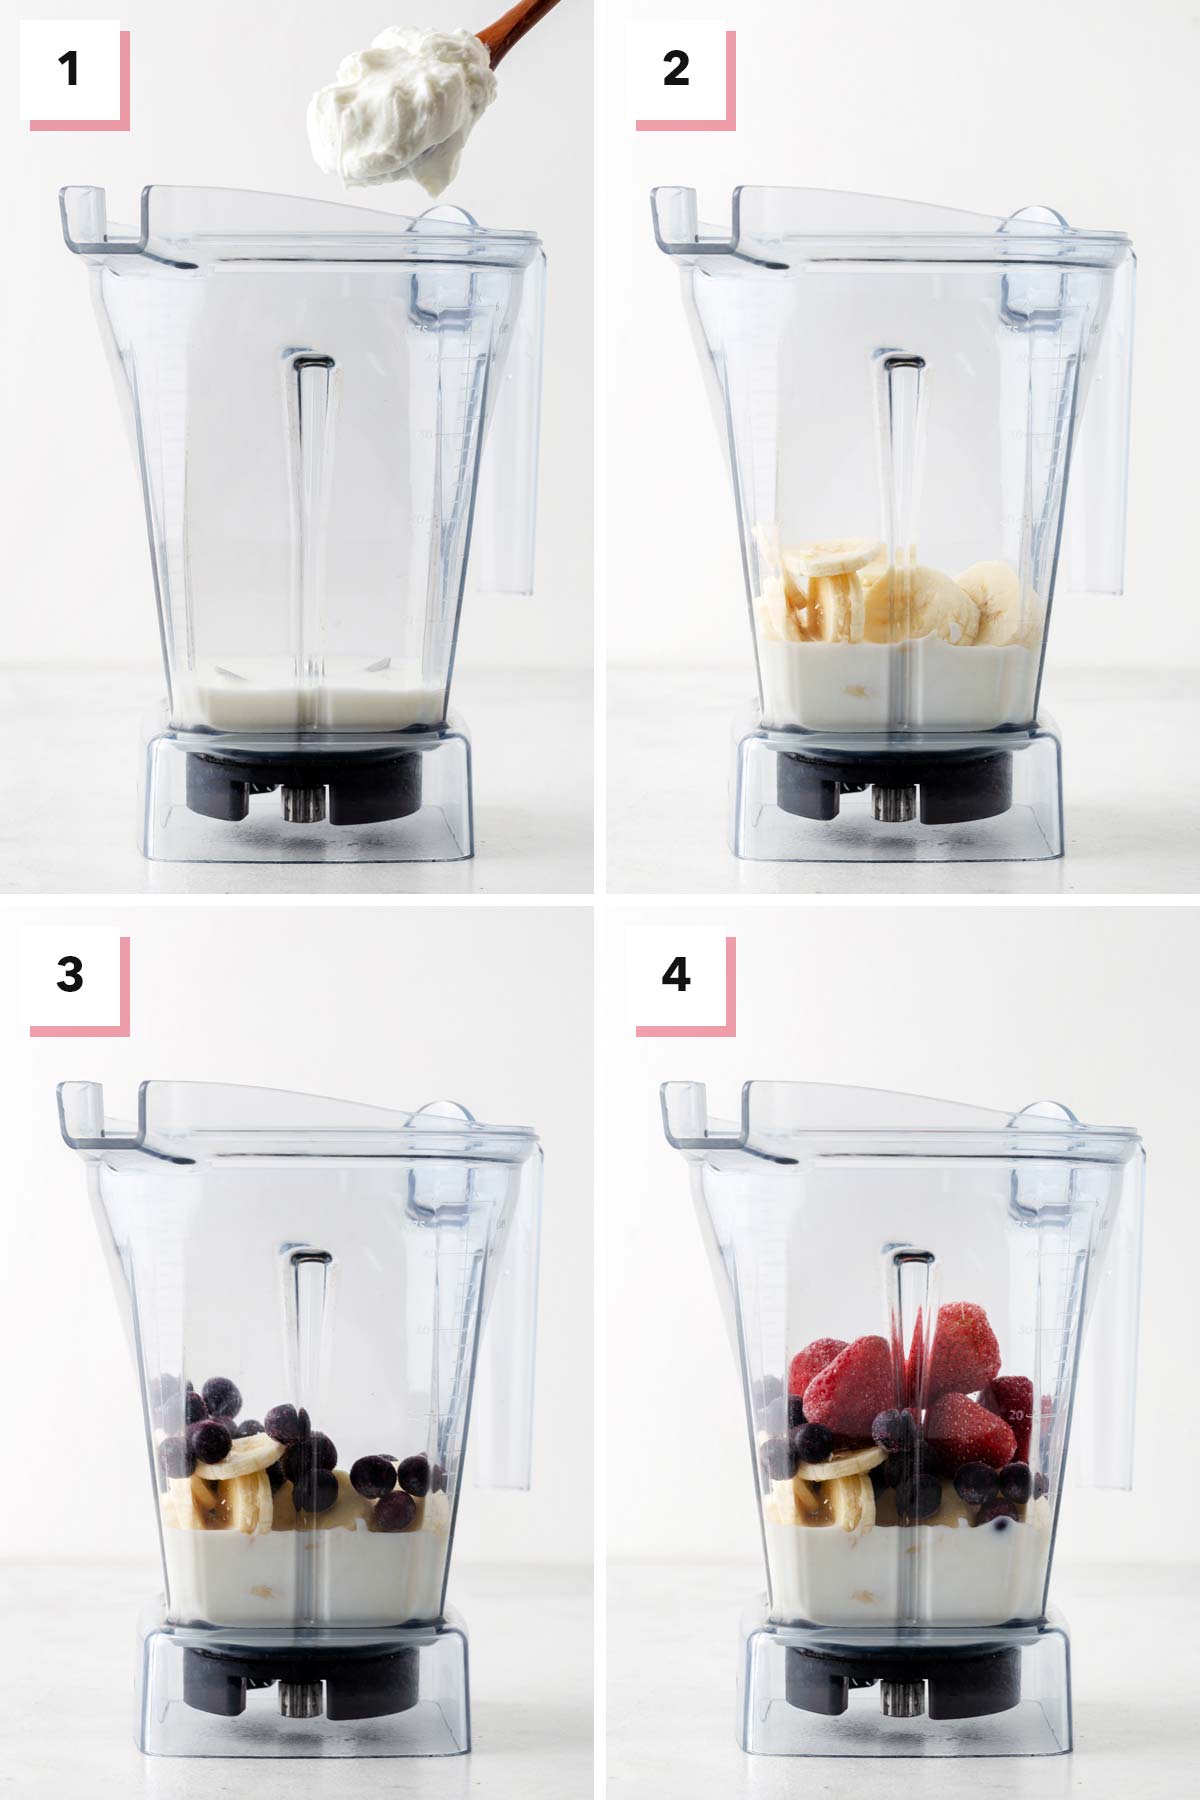 Steps for making a strawberry blueberry smoothie.